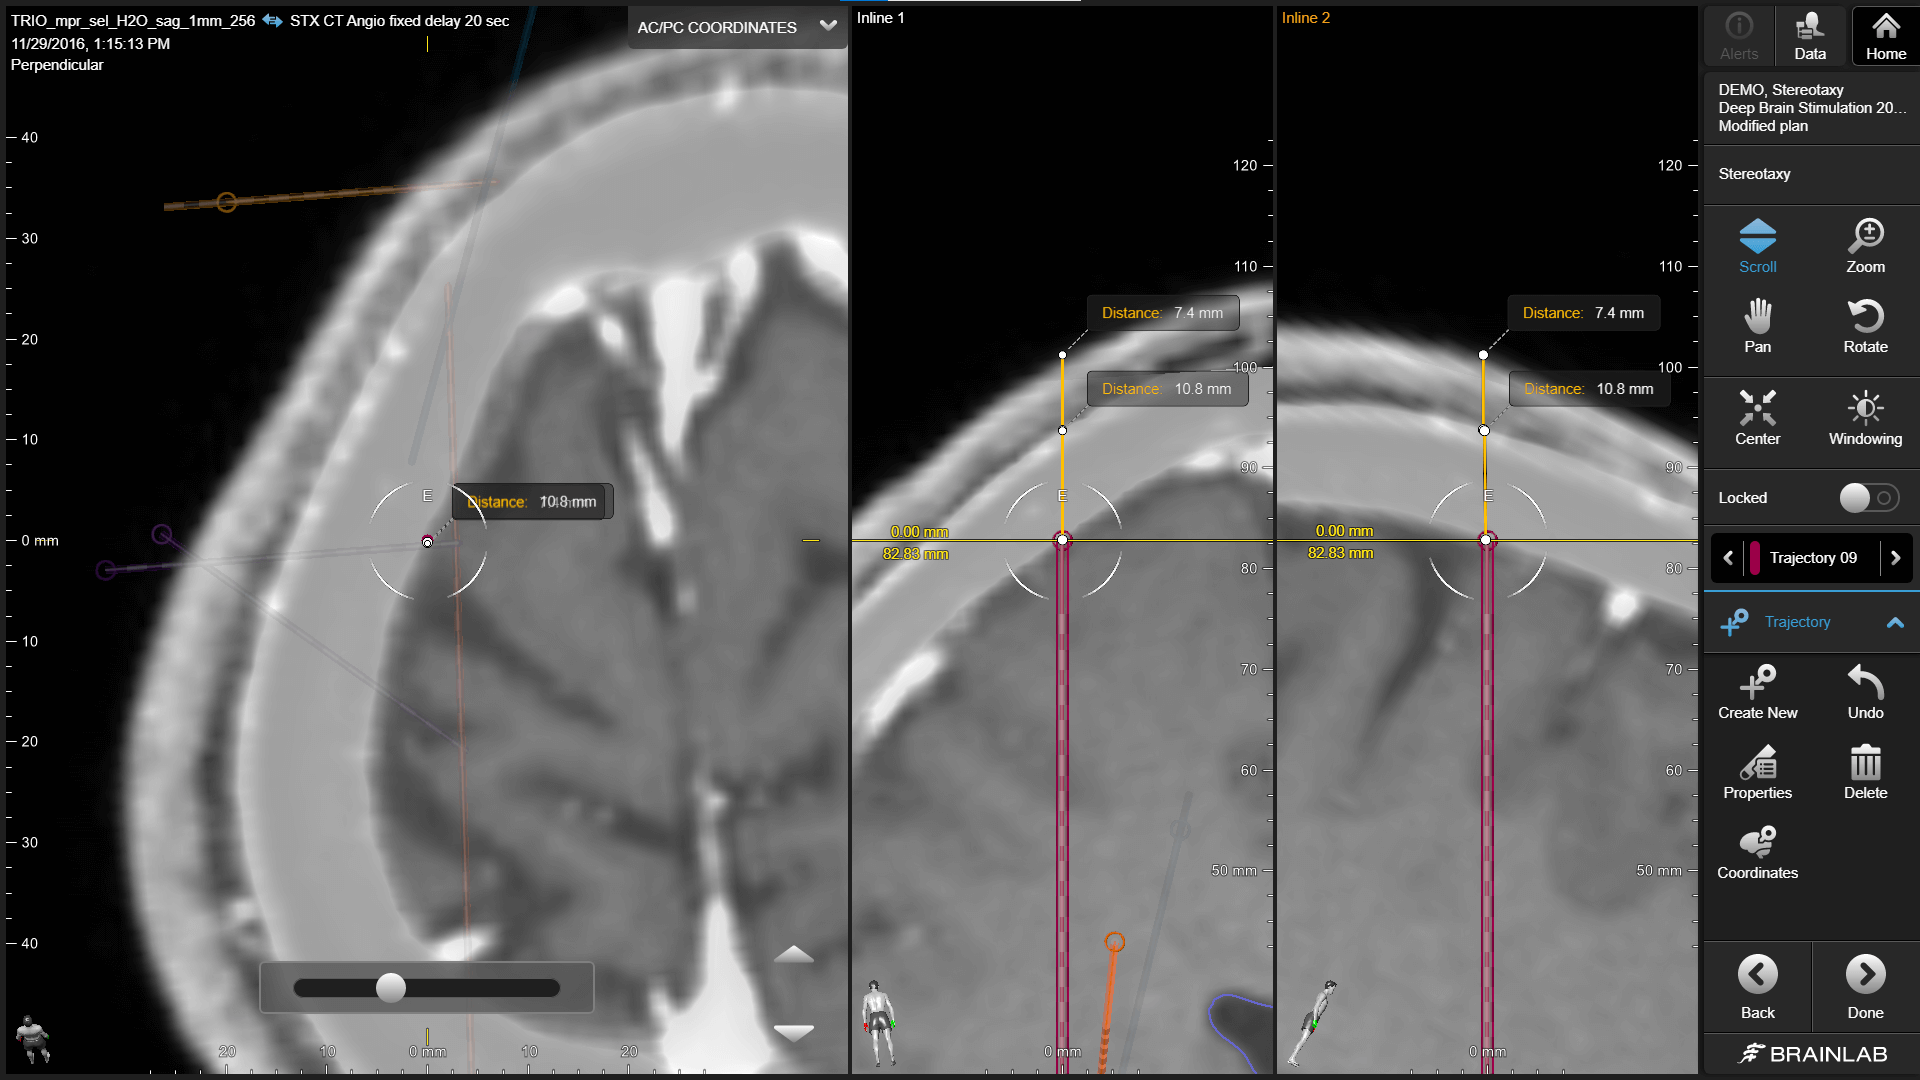 Screenshot of the Alignment Software Cranial depicting an sEEG procedure with Cirq robotic assistance